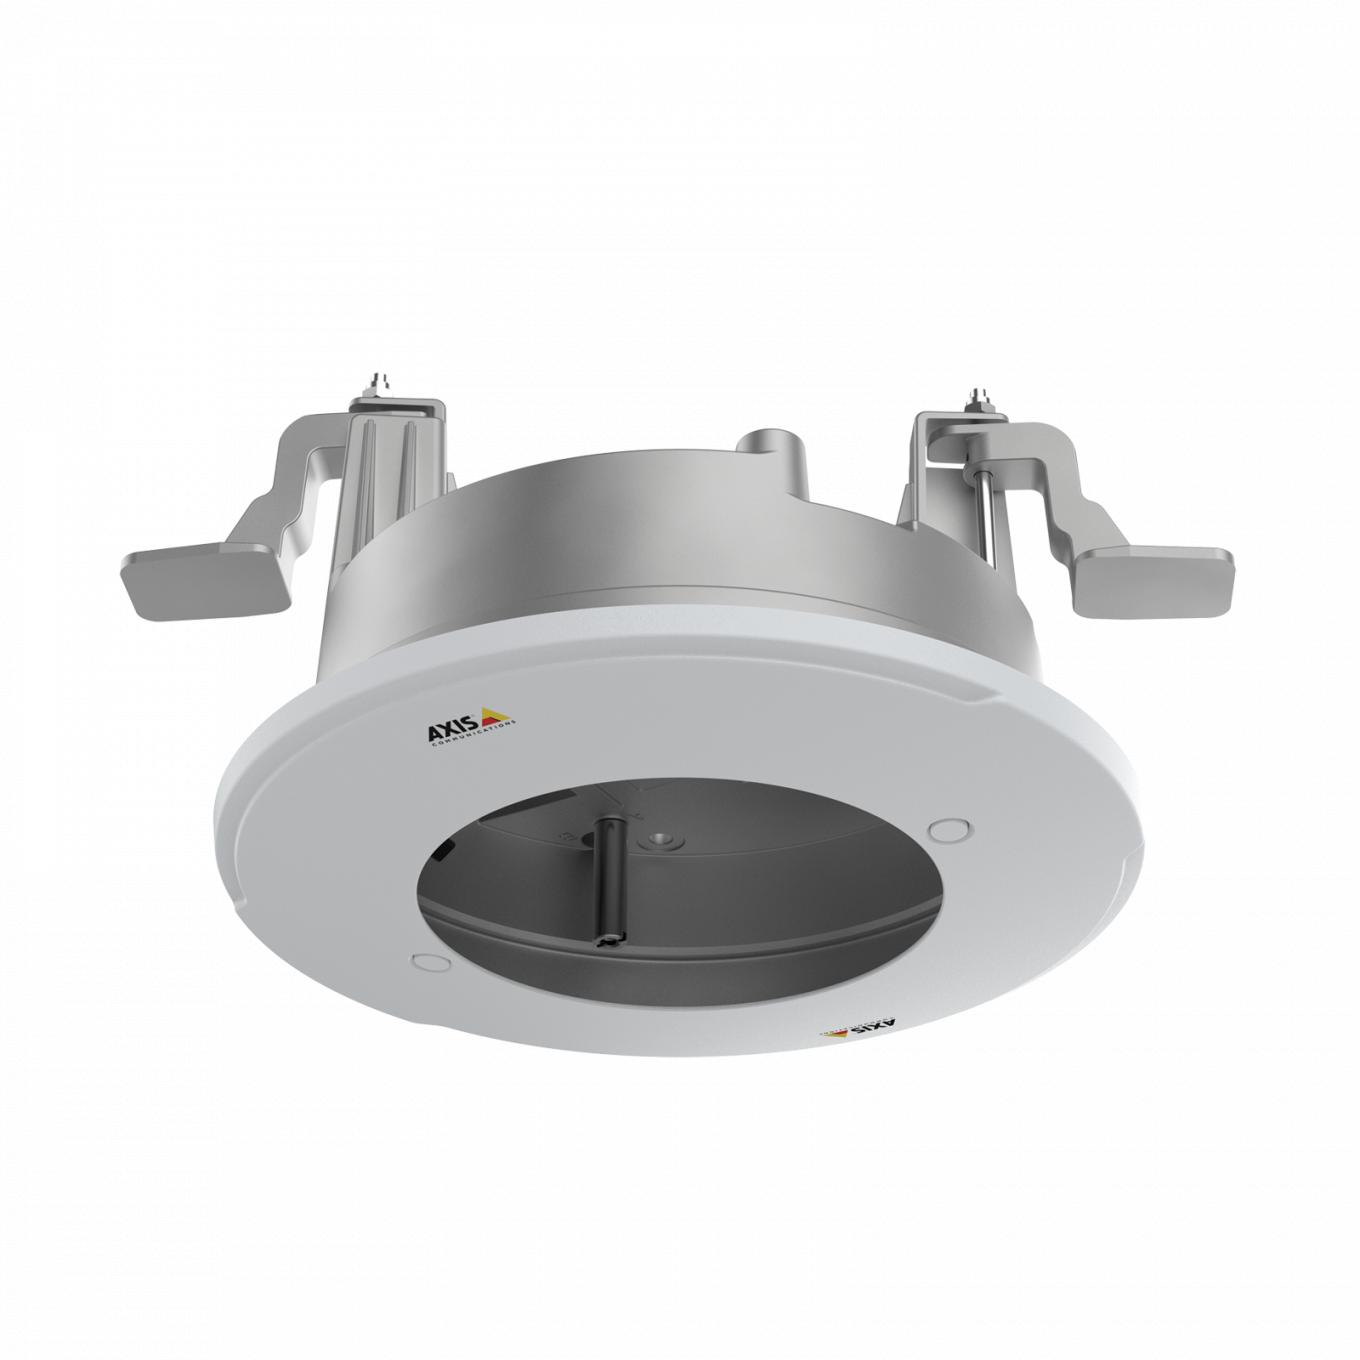 AXIS TM3205 Recessed Mount | Axis Communications